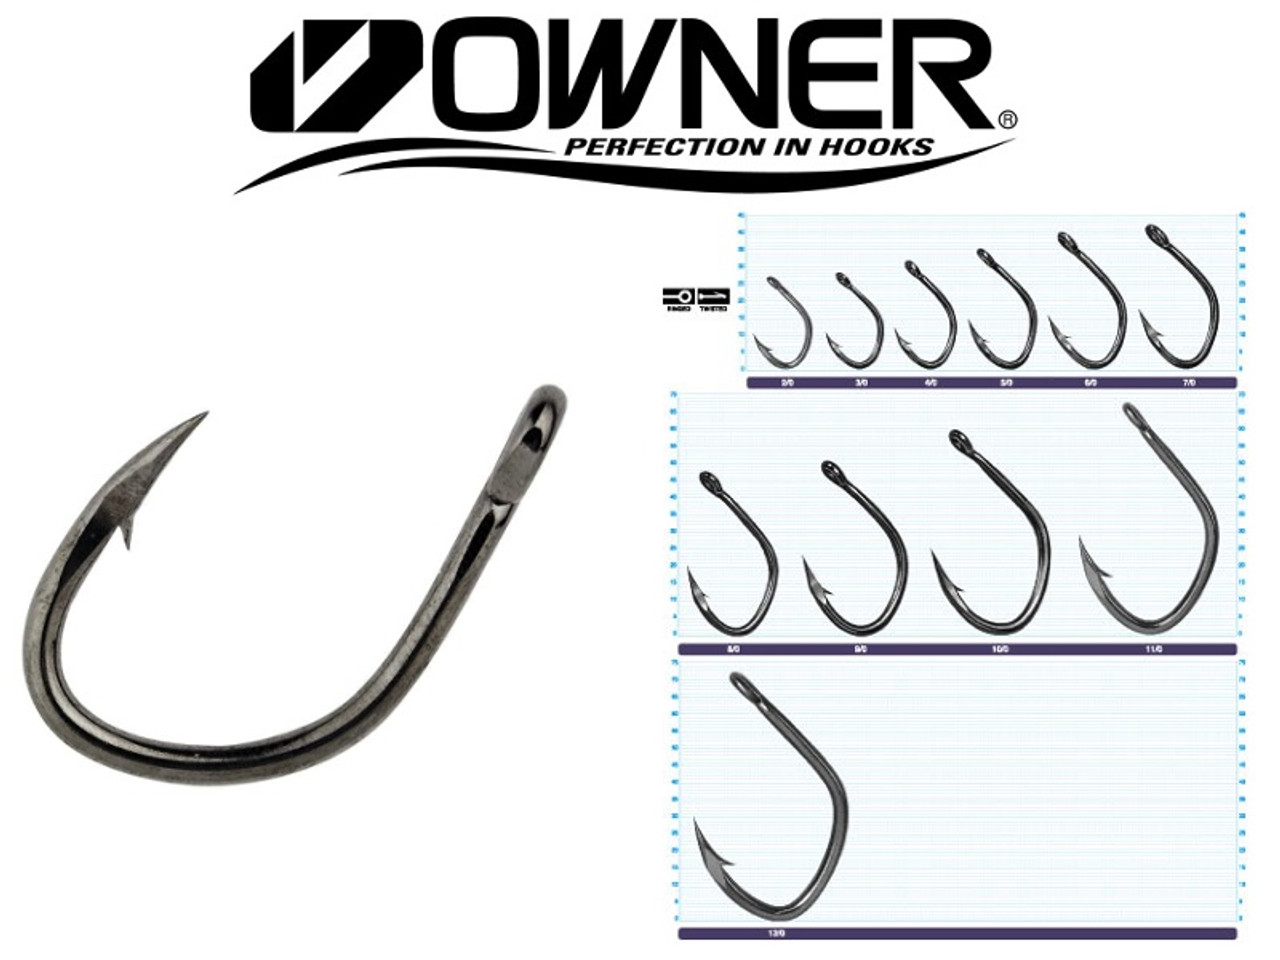 Owner Offshore Hook #5129 8/0 Qty: 5